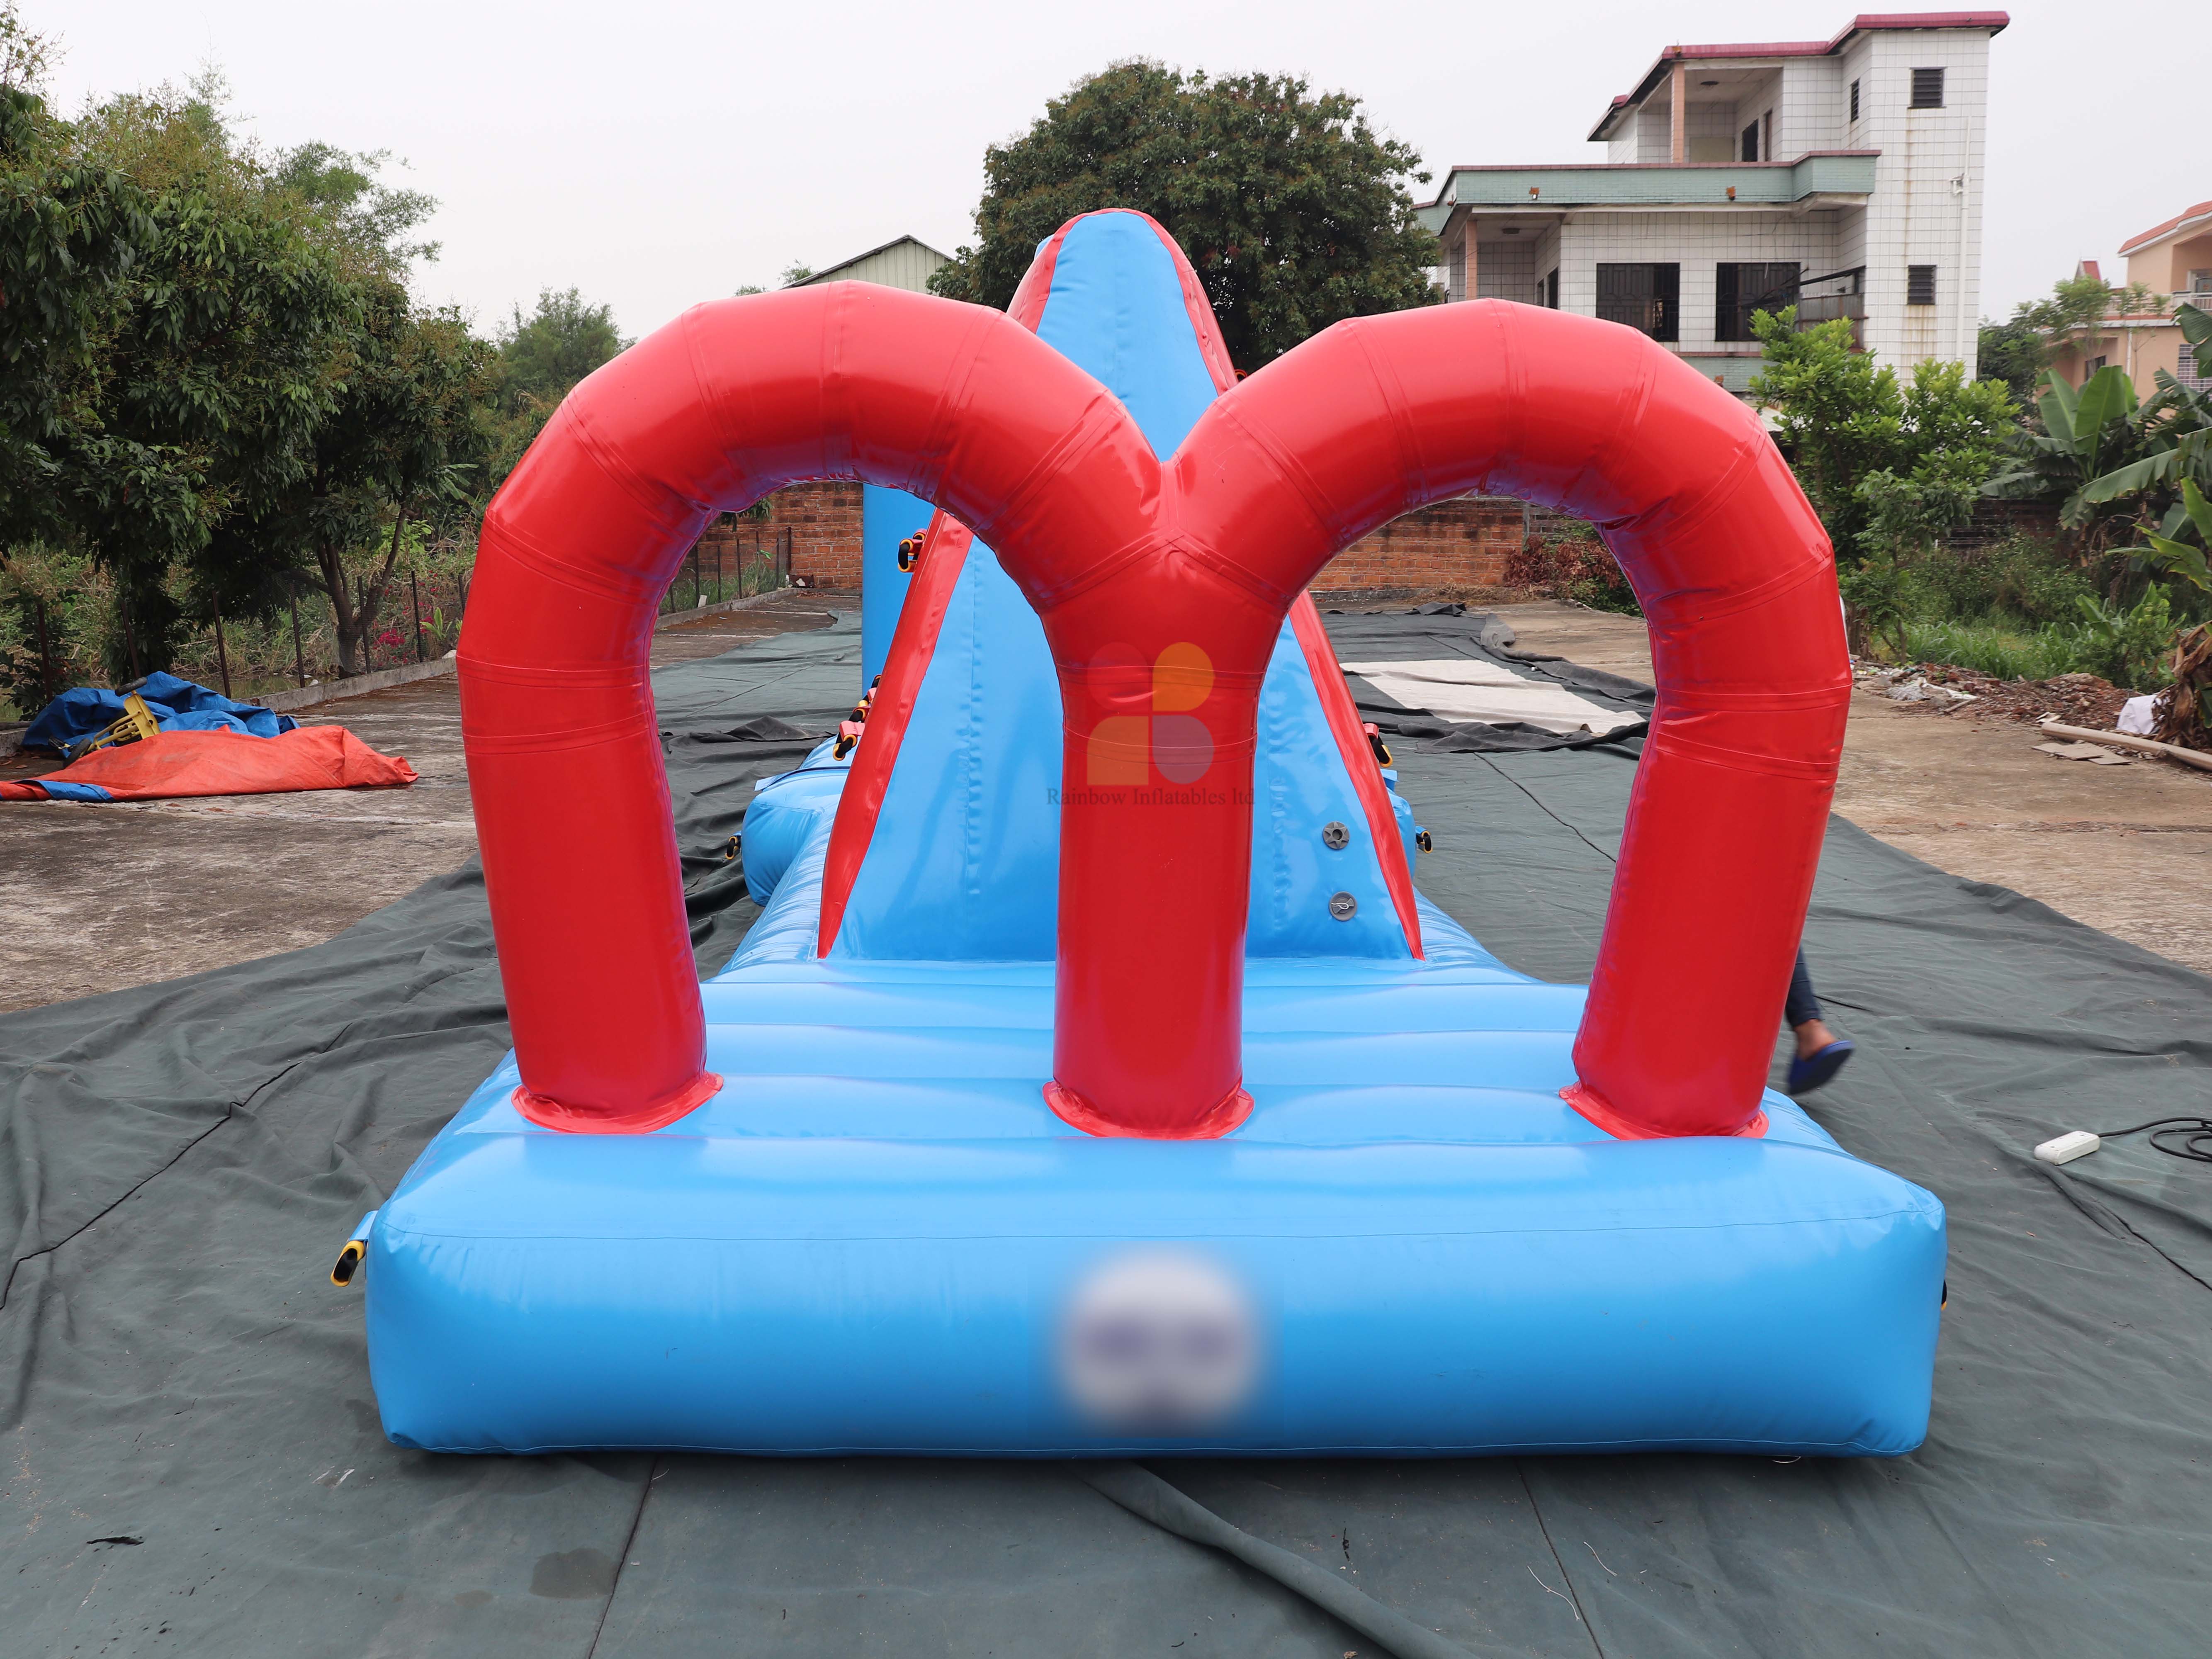 Large Commercial Inflatable Water Obstacle Course Auqa Challenge Game for Sale